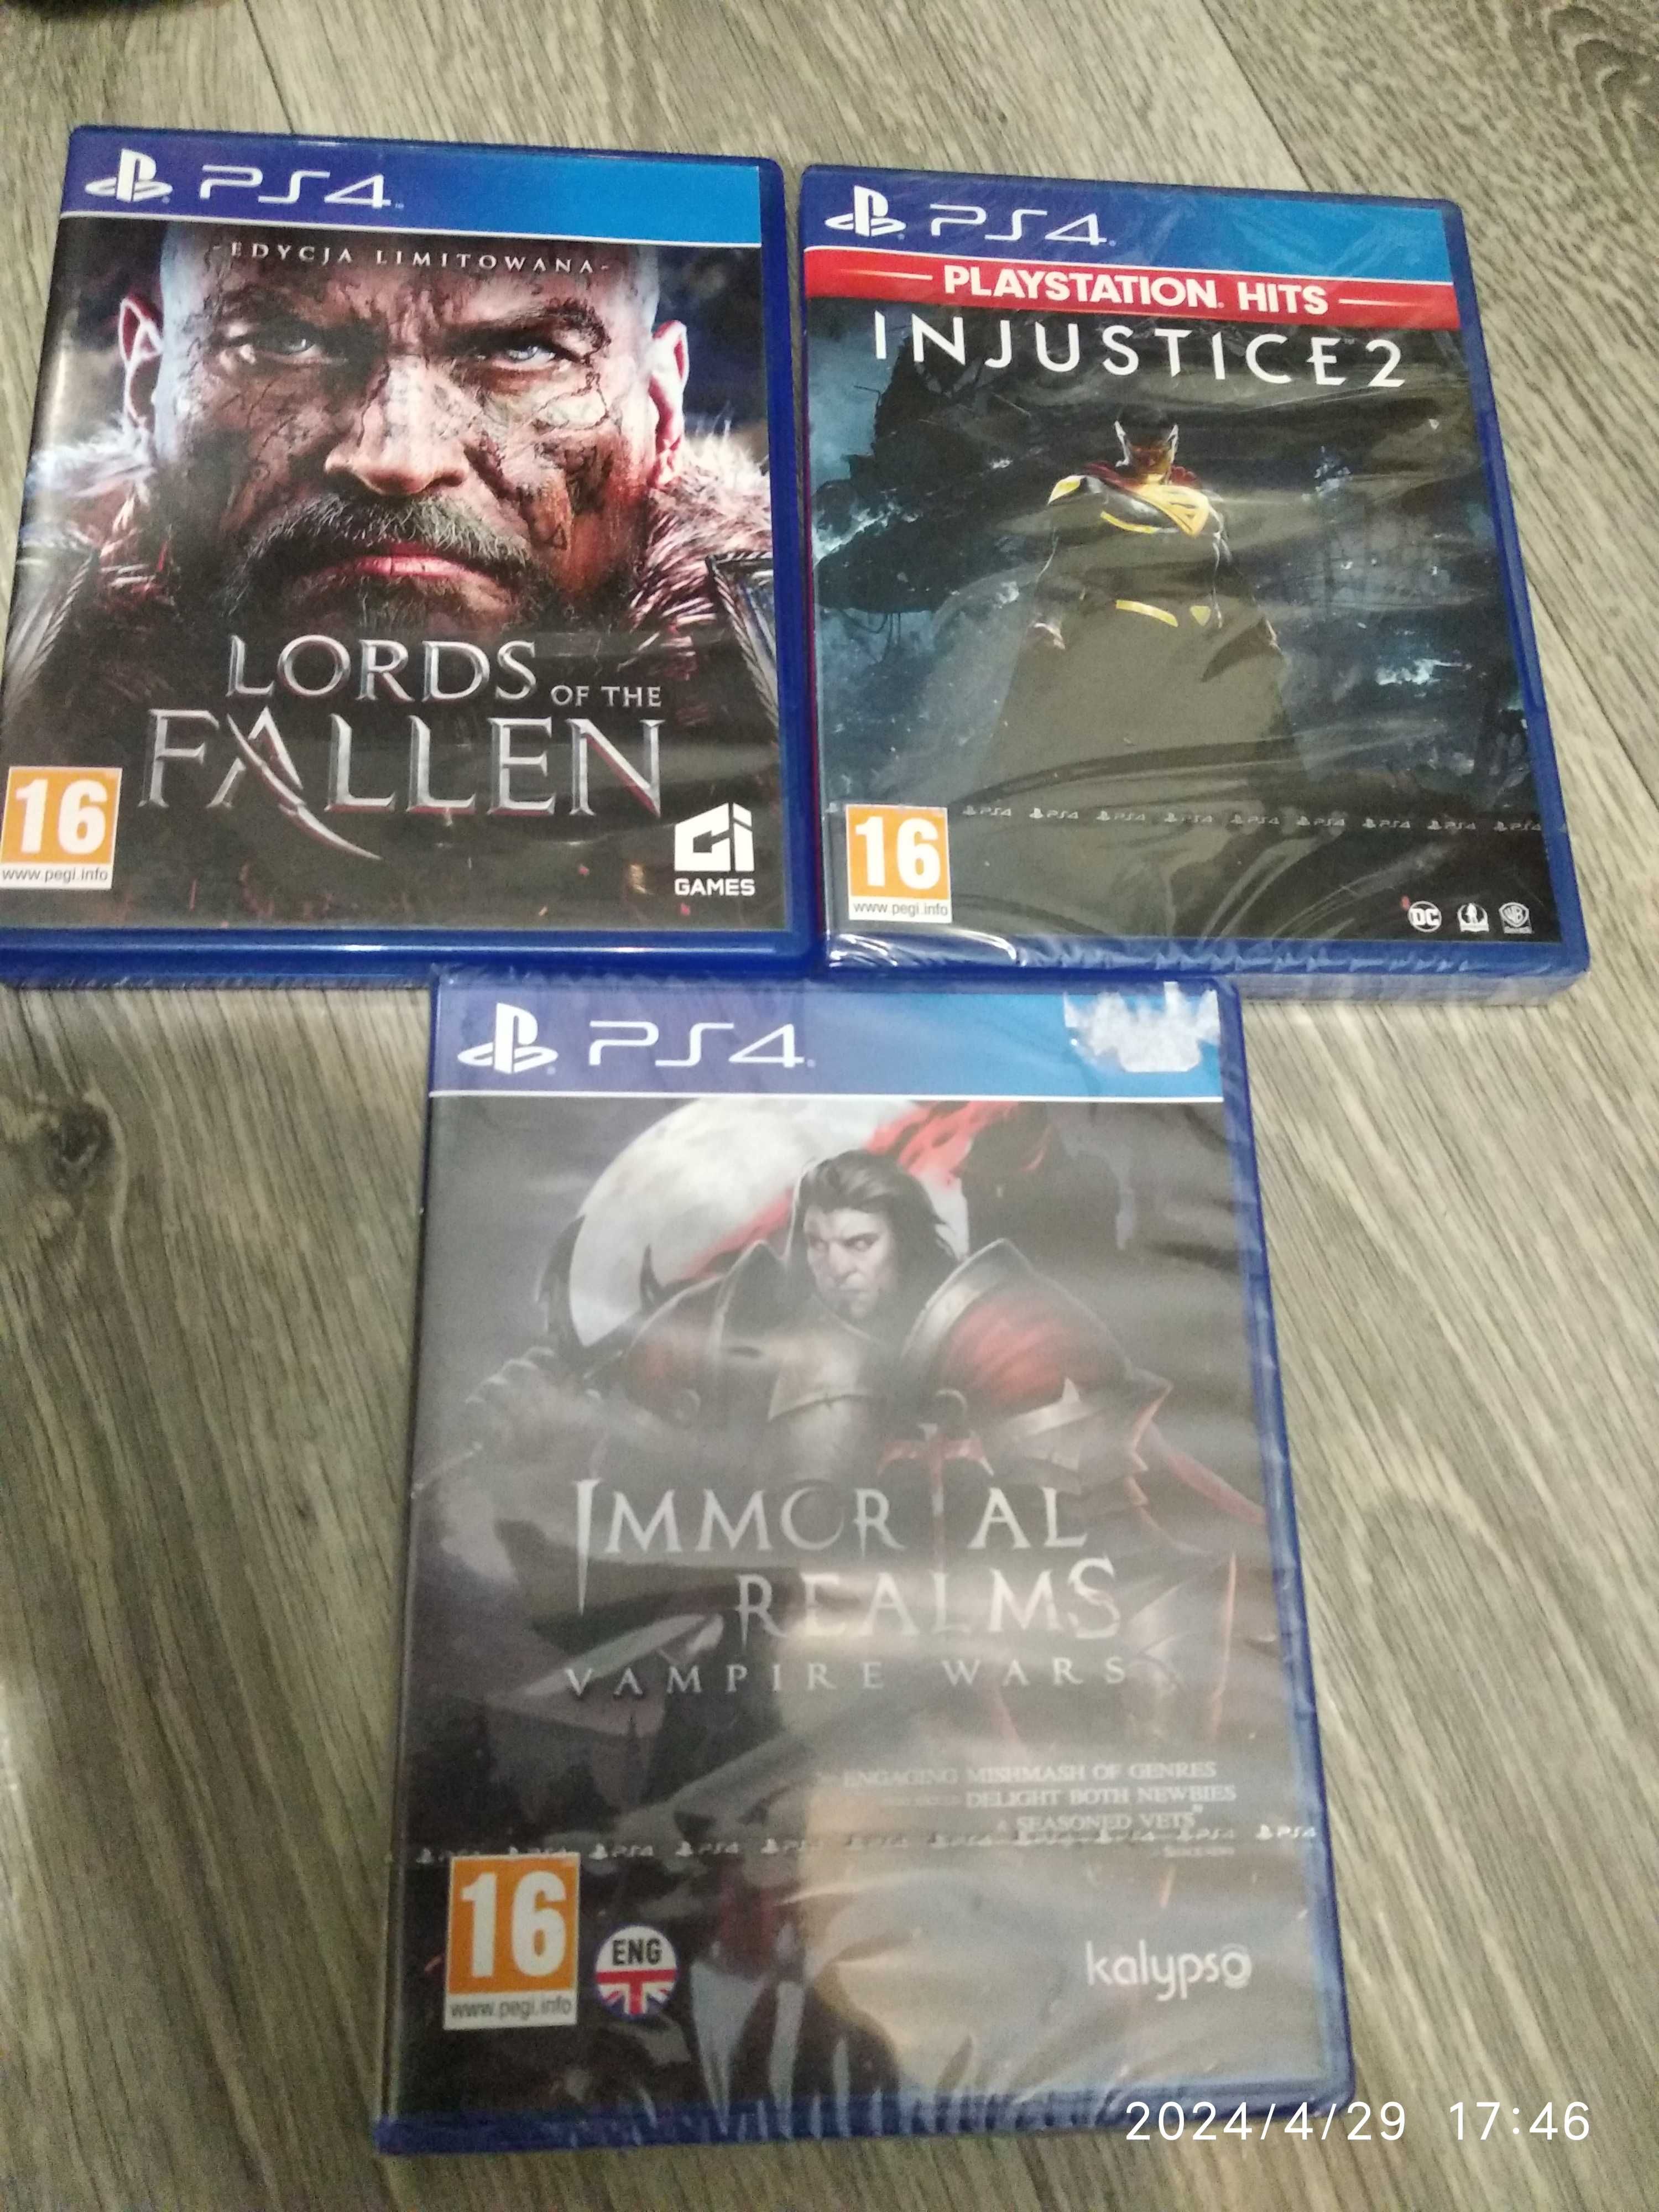 Injustice 2   Lords of the fallen   Immortal realms vampire wars